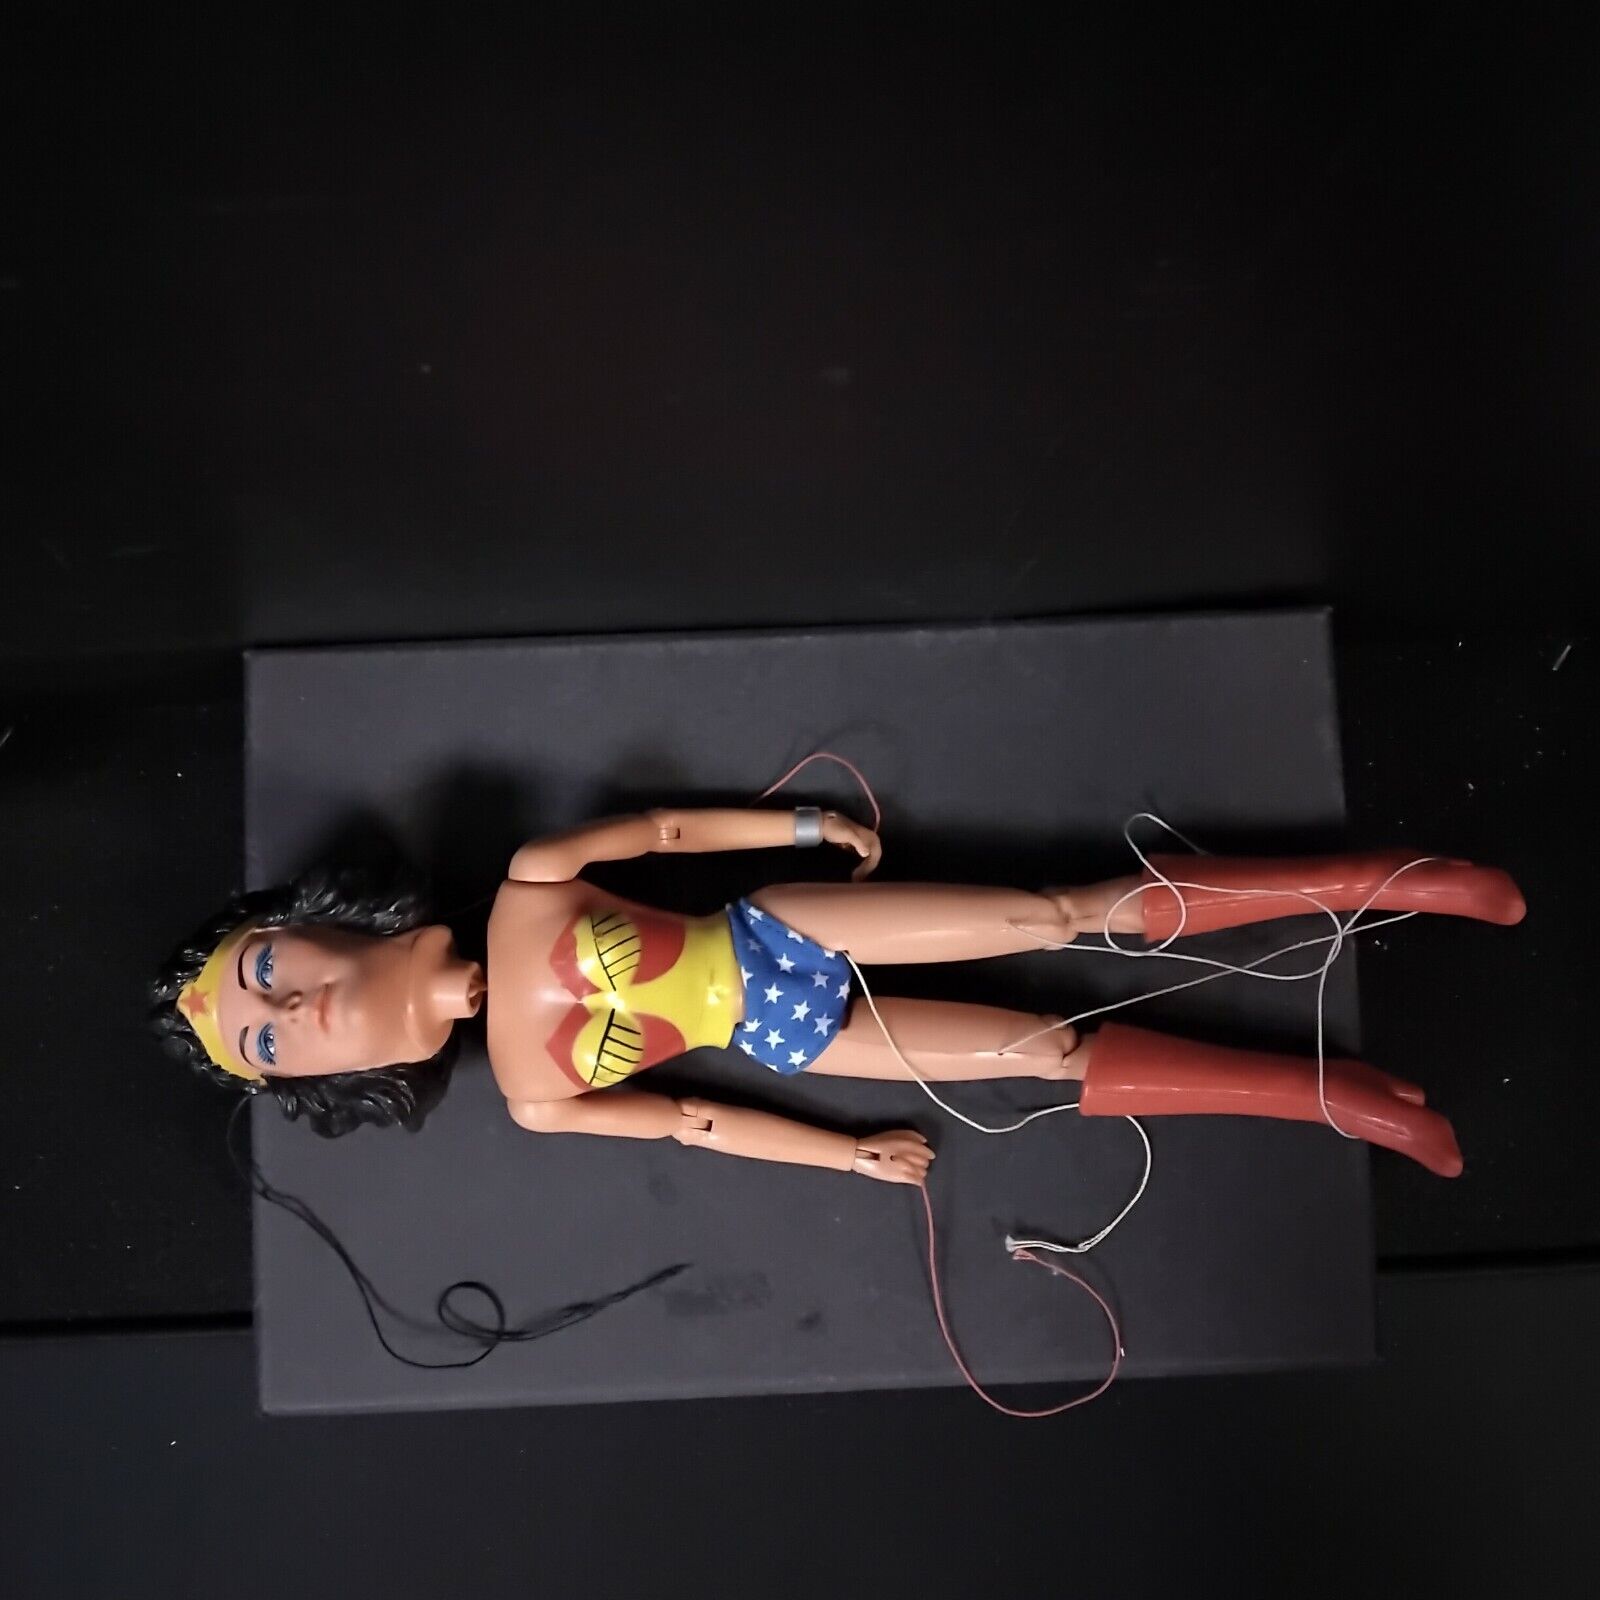 MADISON LTD WONDER WOMAN WITHOUT HAND CONTROLLER 